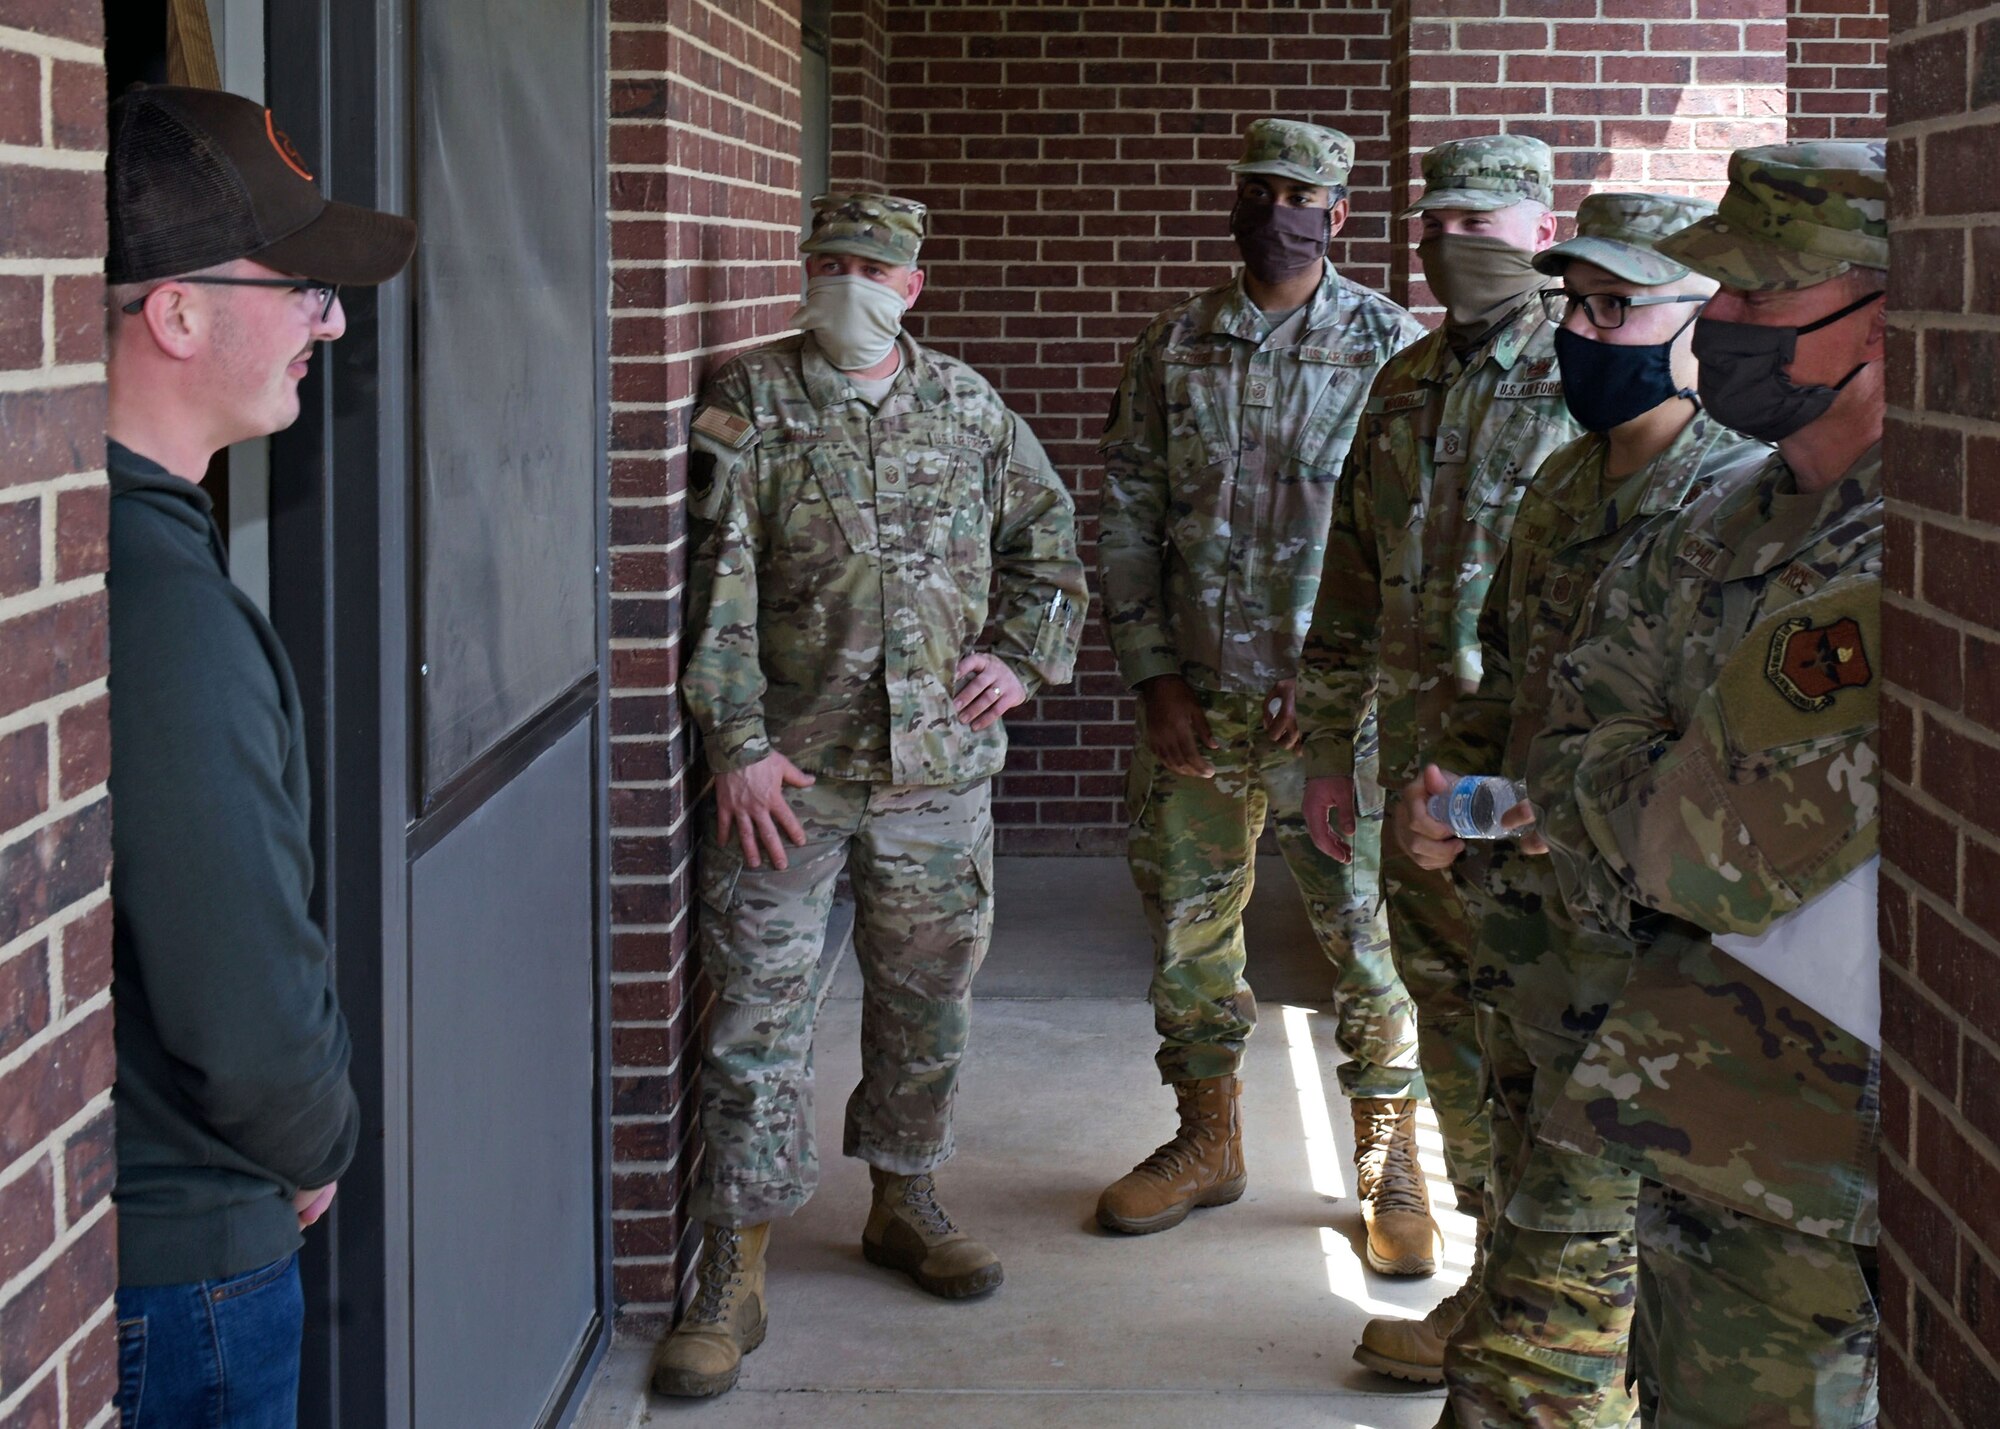 U.S. Air Force First Sergeants check on permanent party Airmen at their dorms April 15, 2020, on Goodfellow Air Force Base, Texas. Since social distancing is imperative to stopping the spread of COVID-19, they are sure to take extra precautions when it comes to mental health and wellness checks on their Airmen. (U.S. Air Force photo by Senior Airman Zachary Chapman)